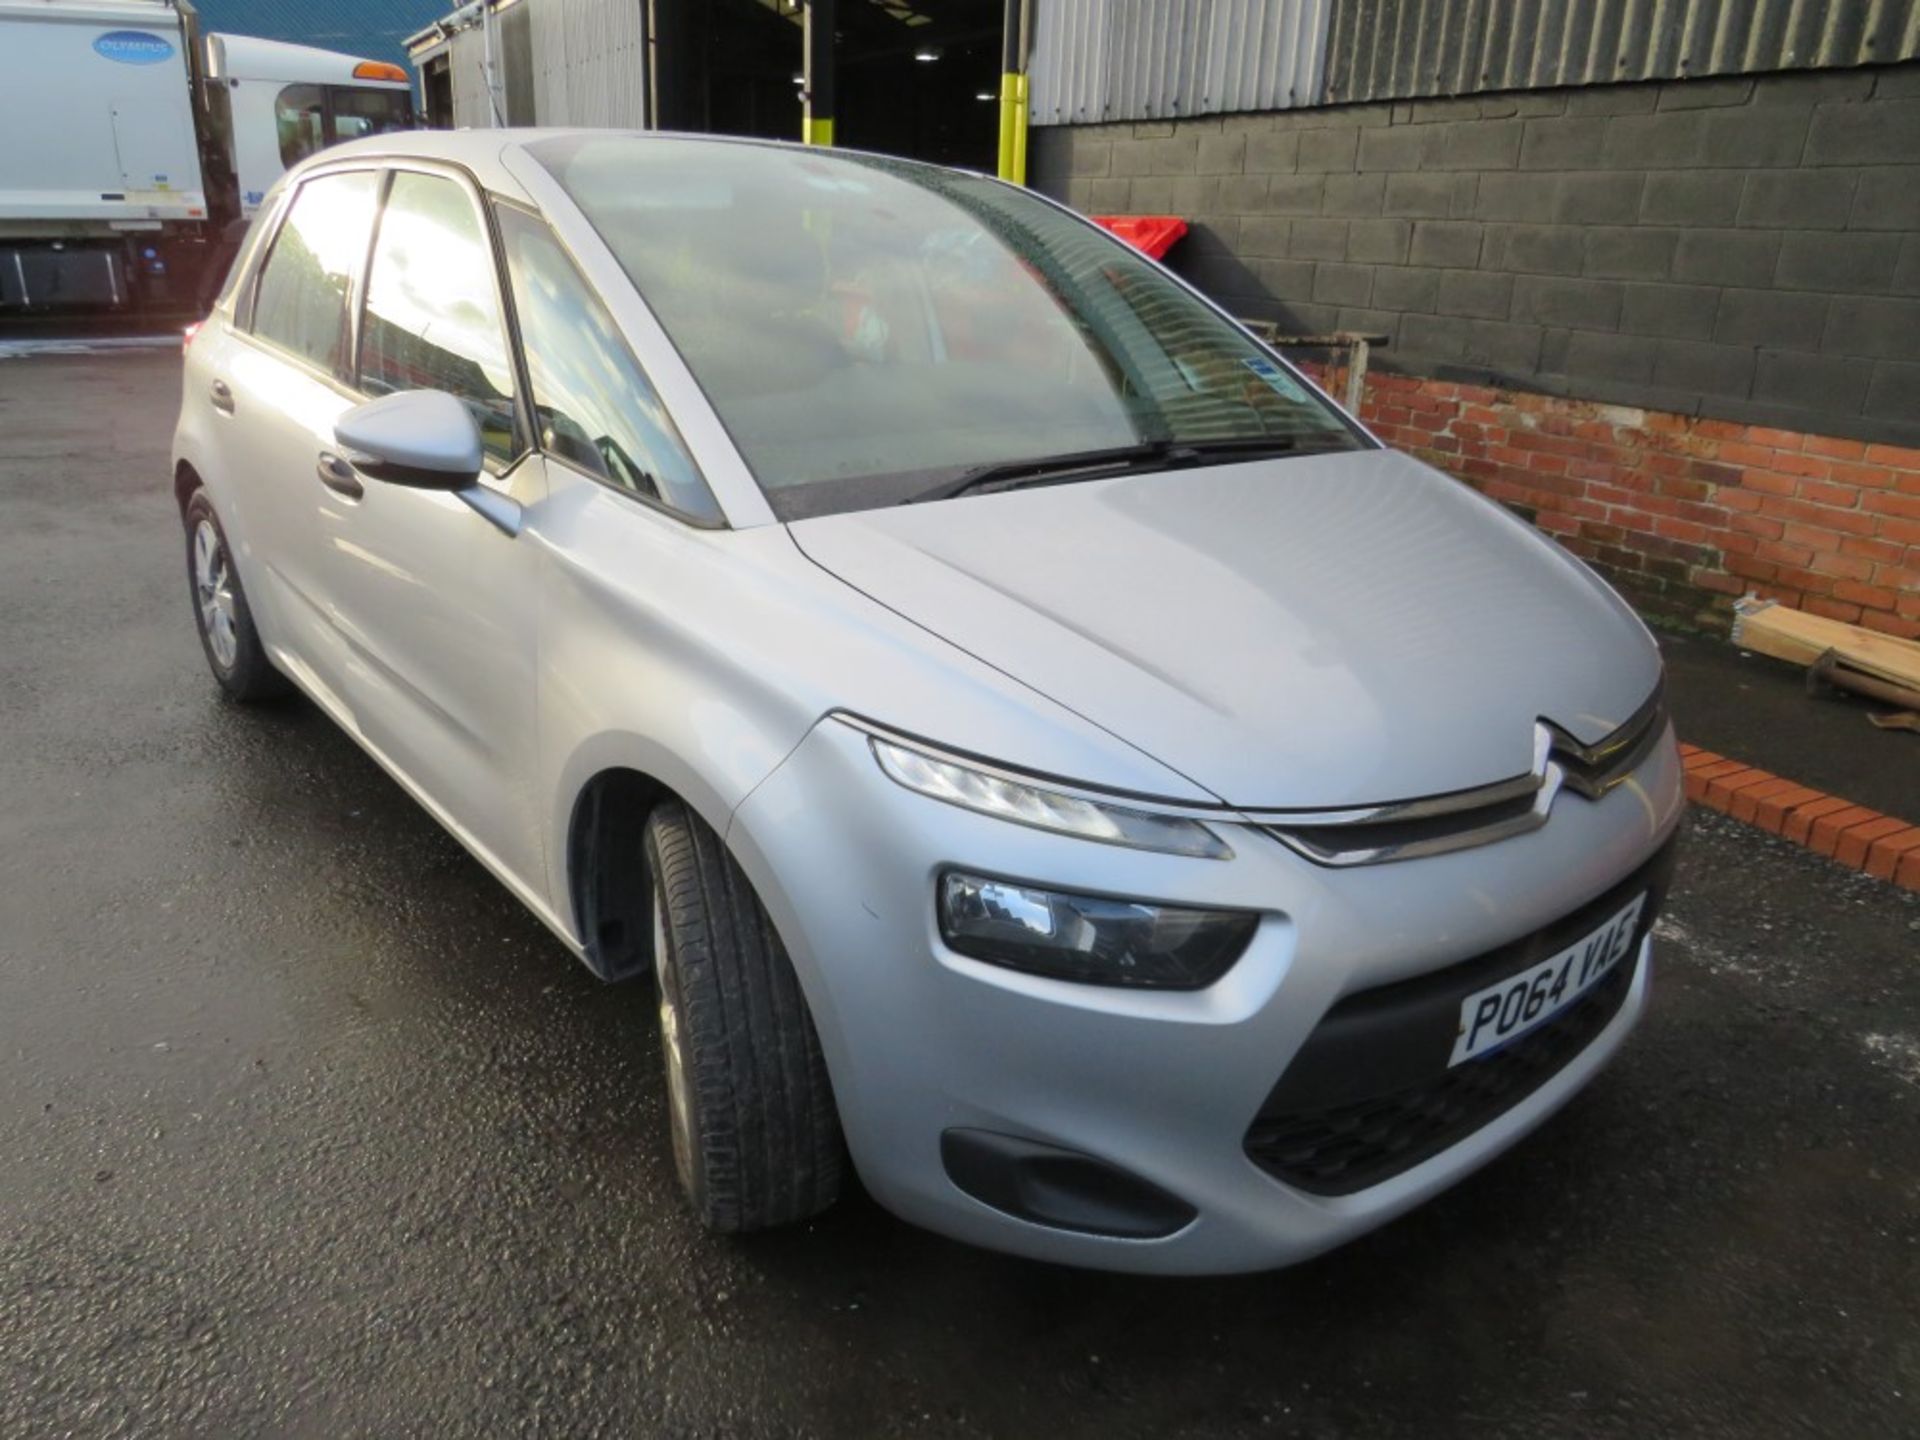 64 reg CITROEN C4 PICASSO VTR HDI (DIRECT COUNCIL) 1ST REG 09/14, 129691M, V5 HERE, 1 OWNER FROM NEW